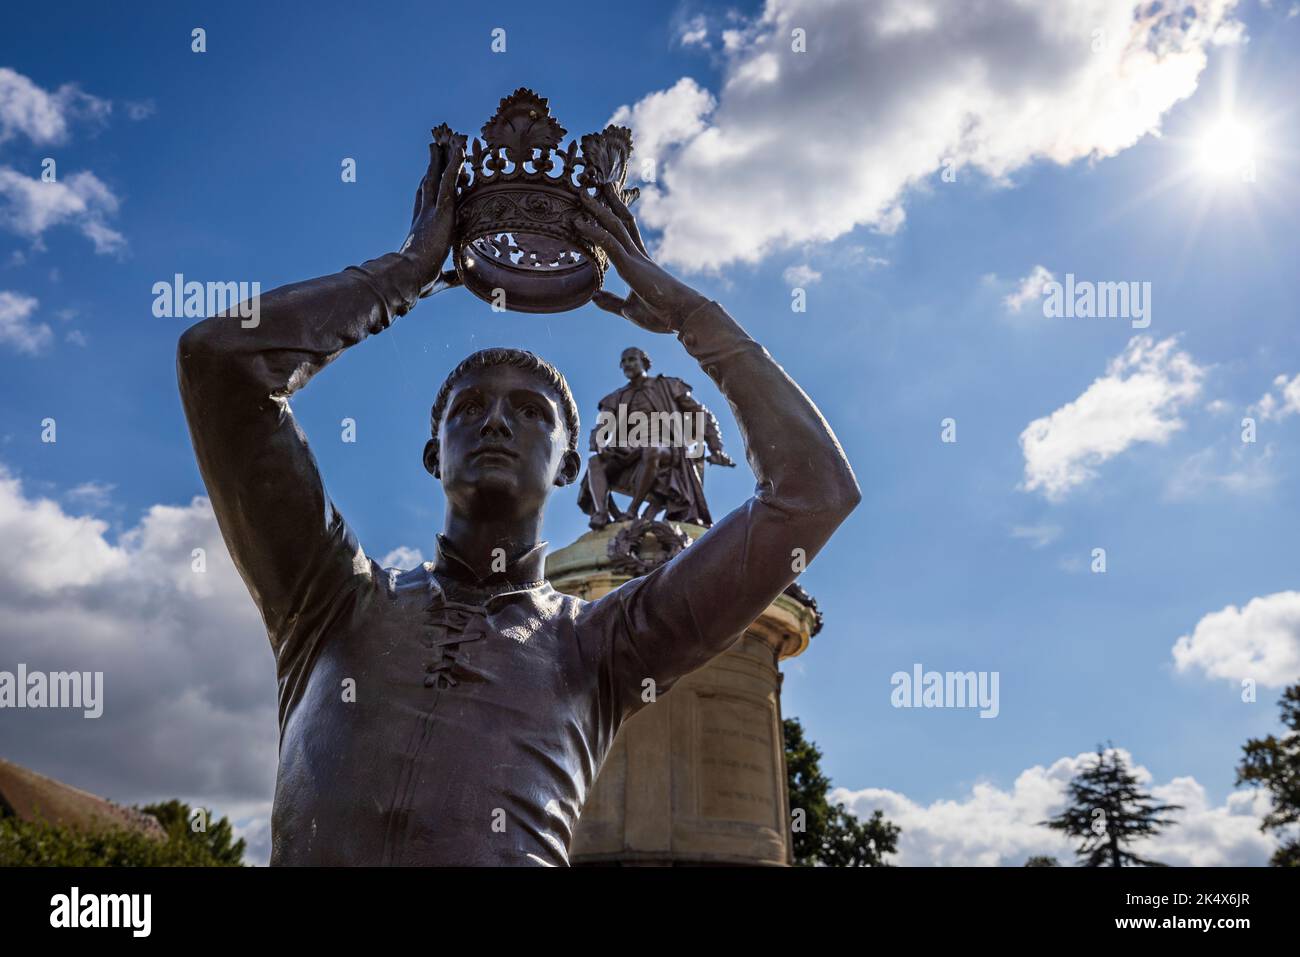 A statue of the character Prince Hal (Henry V) and William Shakespeare on the apex of the Gower Monument, Stratford Upon Avon, England Stock Photo